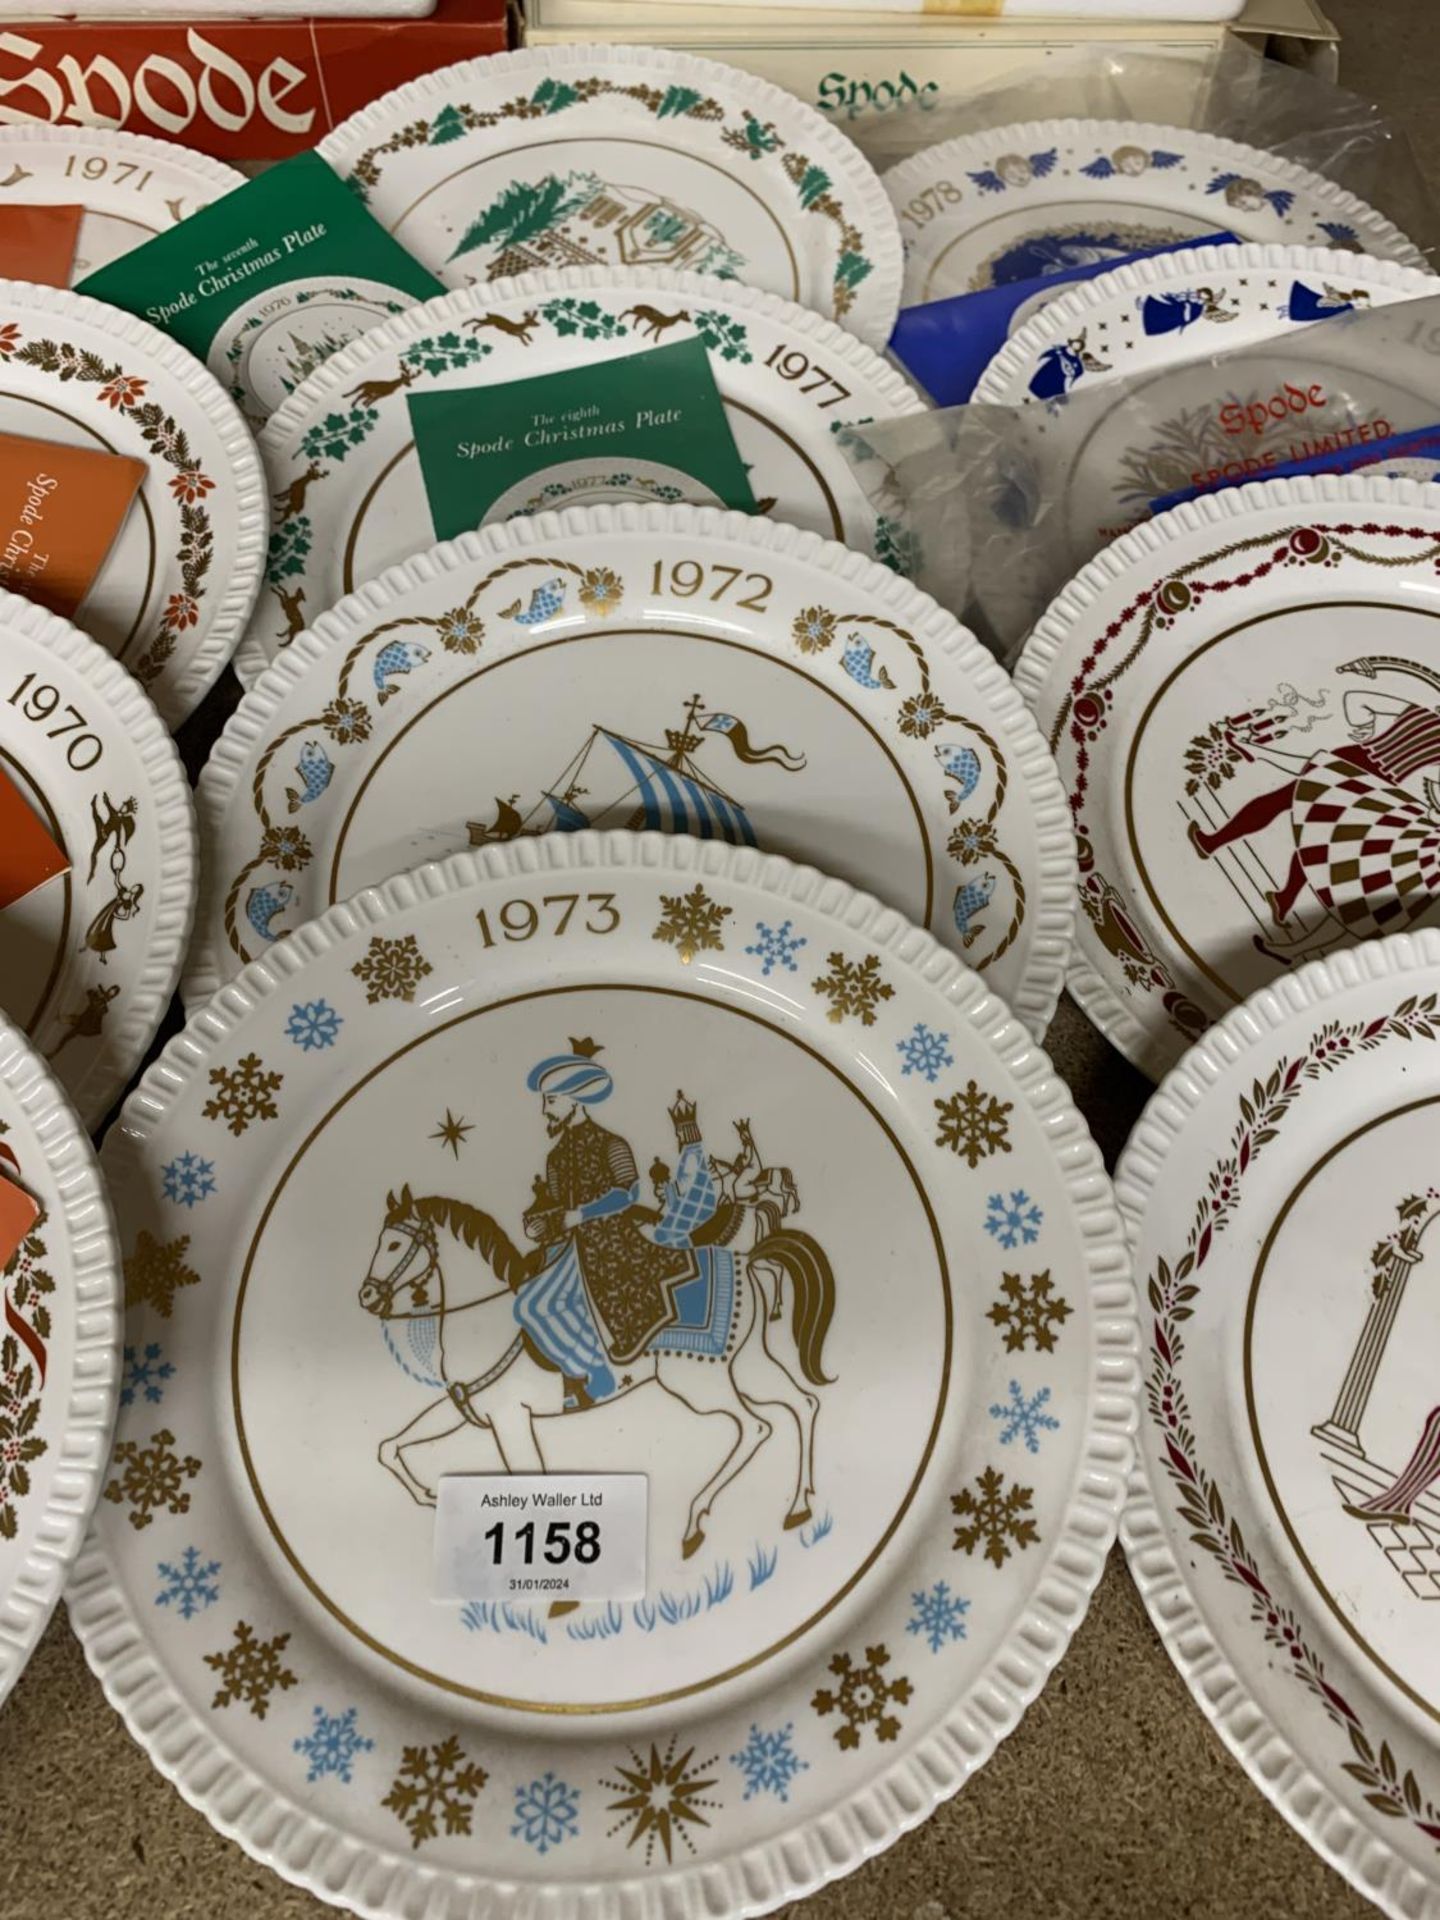 A COLLECTION OF SPODE CHRISTMAS PLATES FROM 1970 TO 1981, MOST BOXED WITH CERTIFICATES - Image 3 of 5